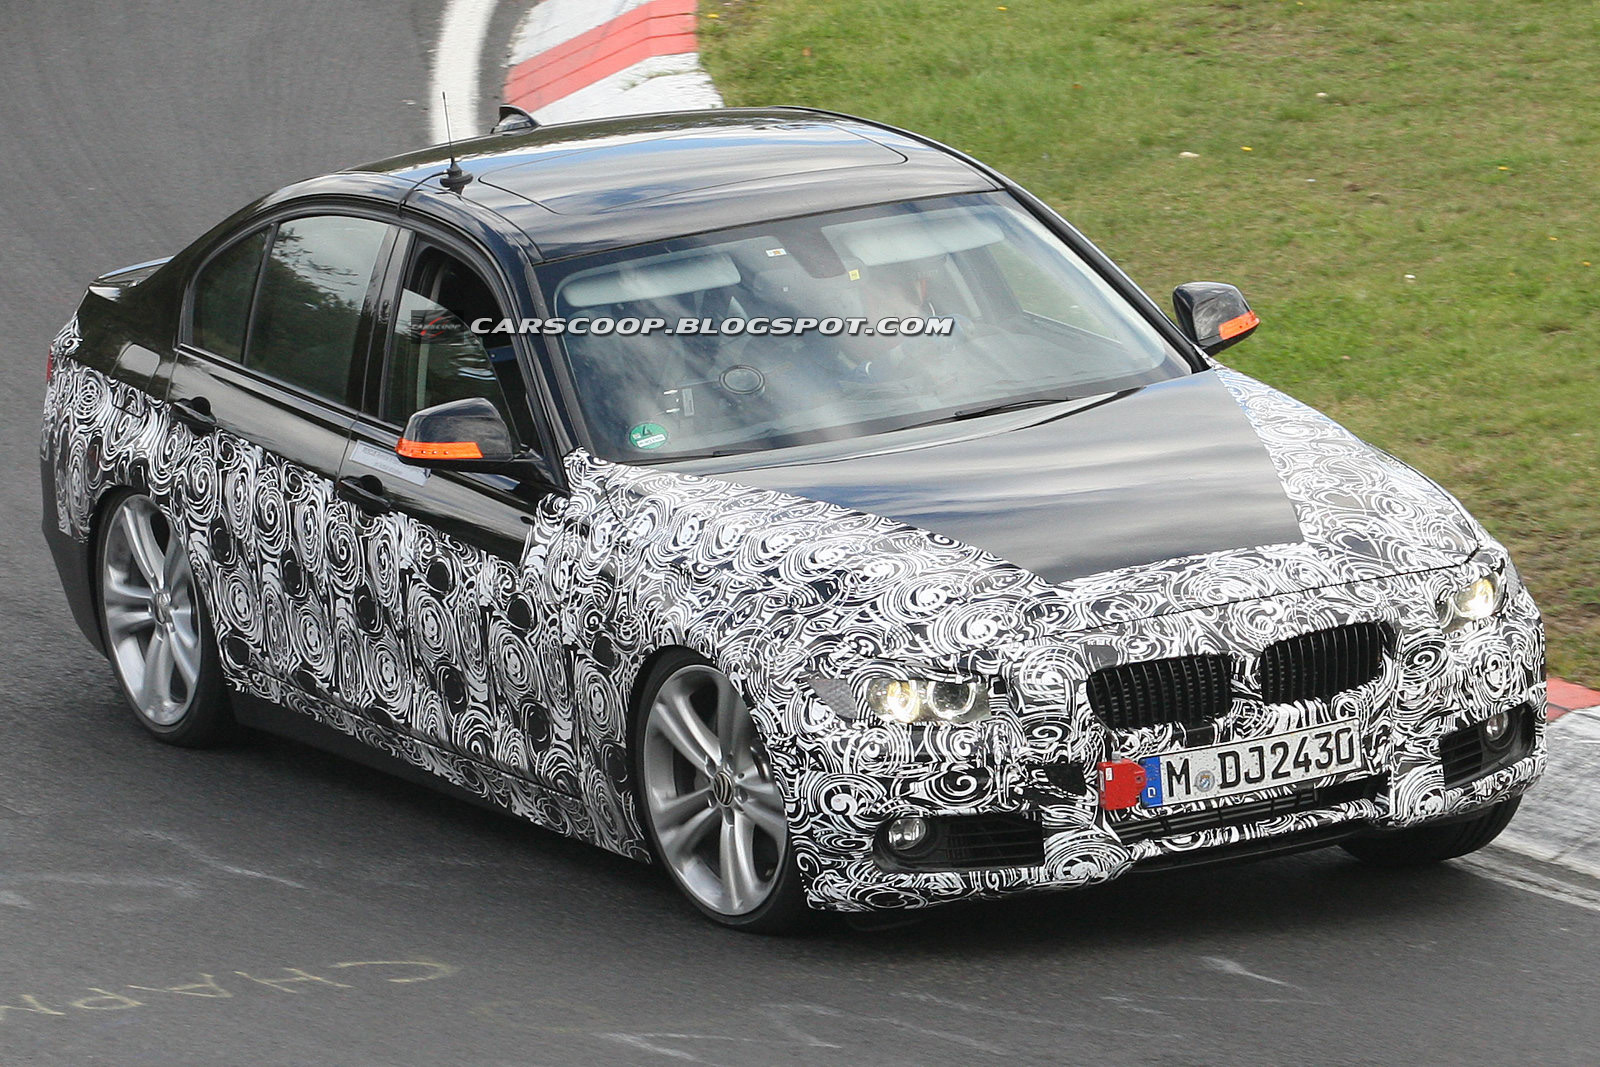 SPY SHOTS: New BMW ActiveHybrid 3 Based on the F30 3-Series | Carscoops